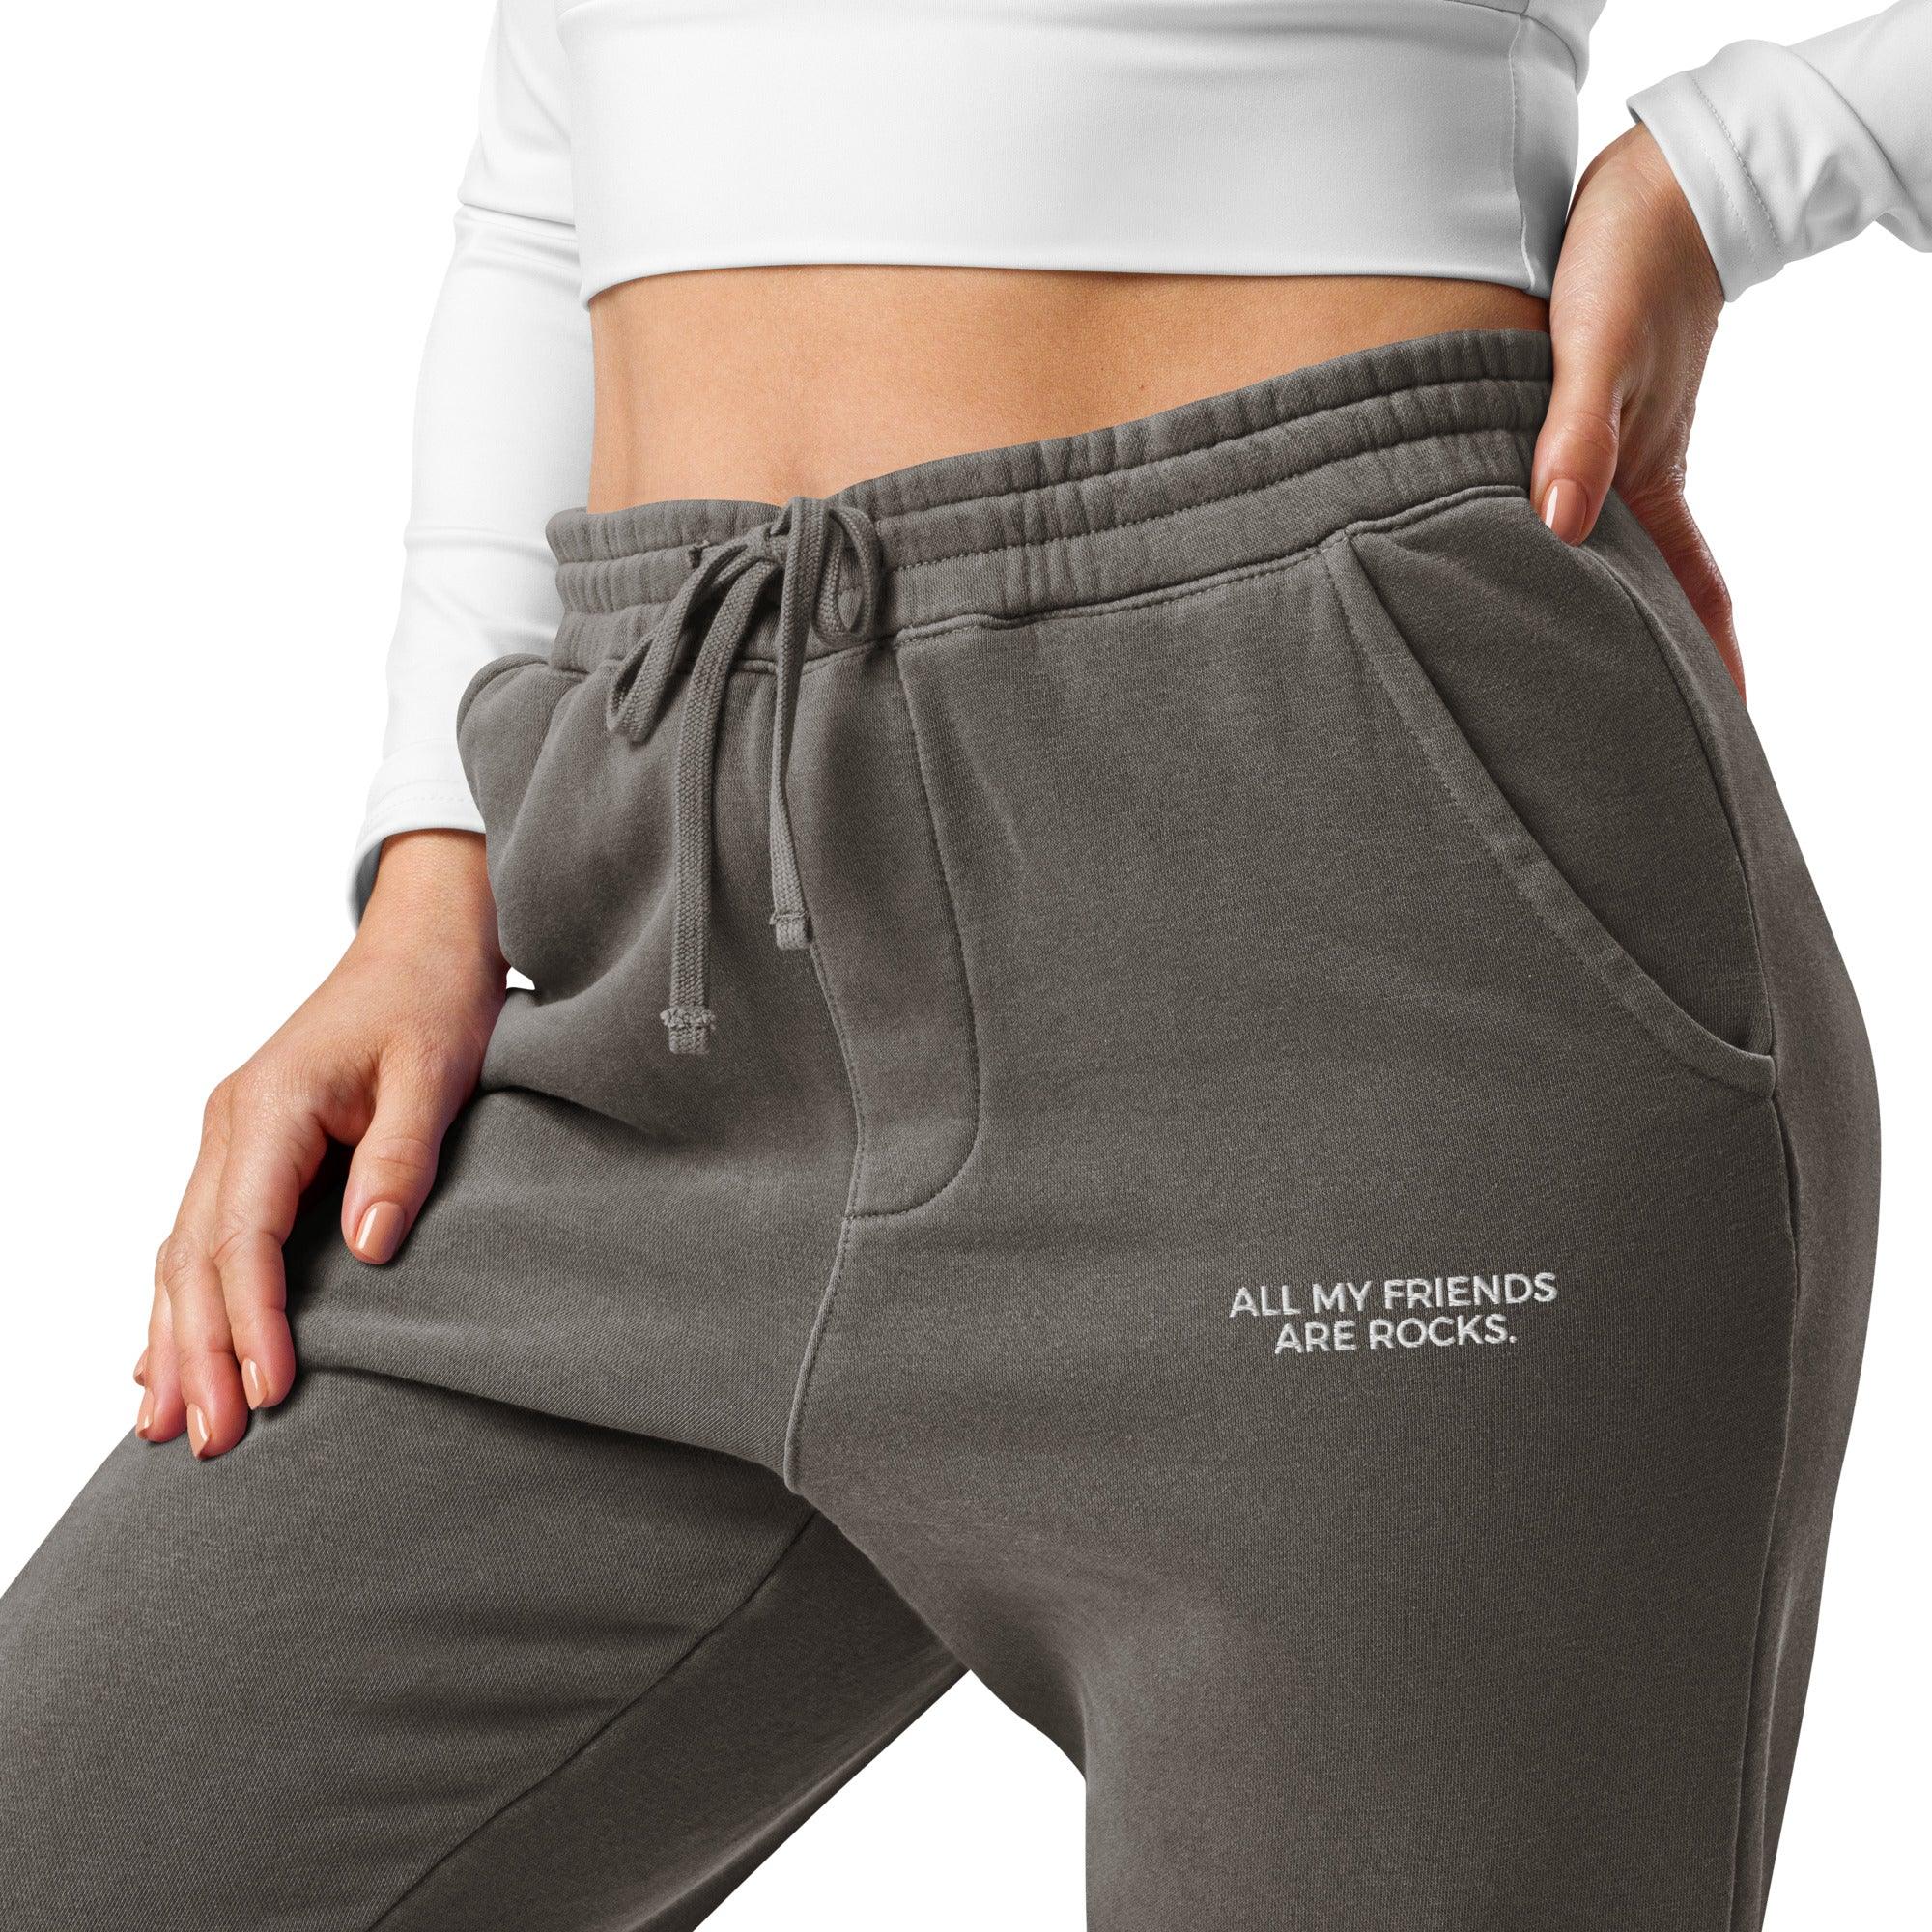 ALL MY FRIENDS ARE ROCKS - PIGMENT-DYED JOGGER SWEATPANTS - apparel - The Mineral Maven